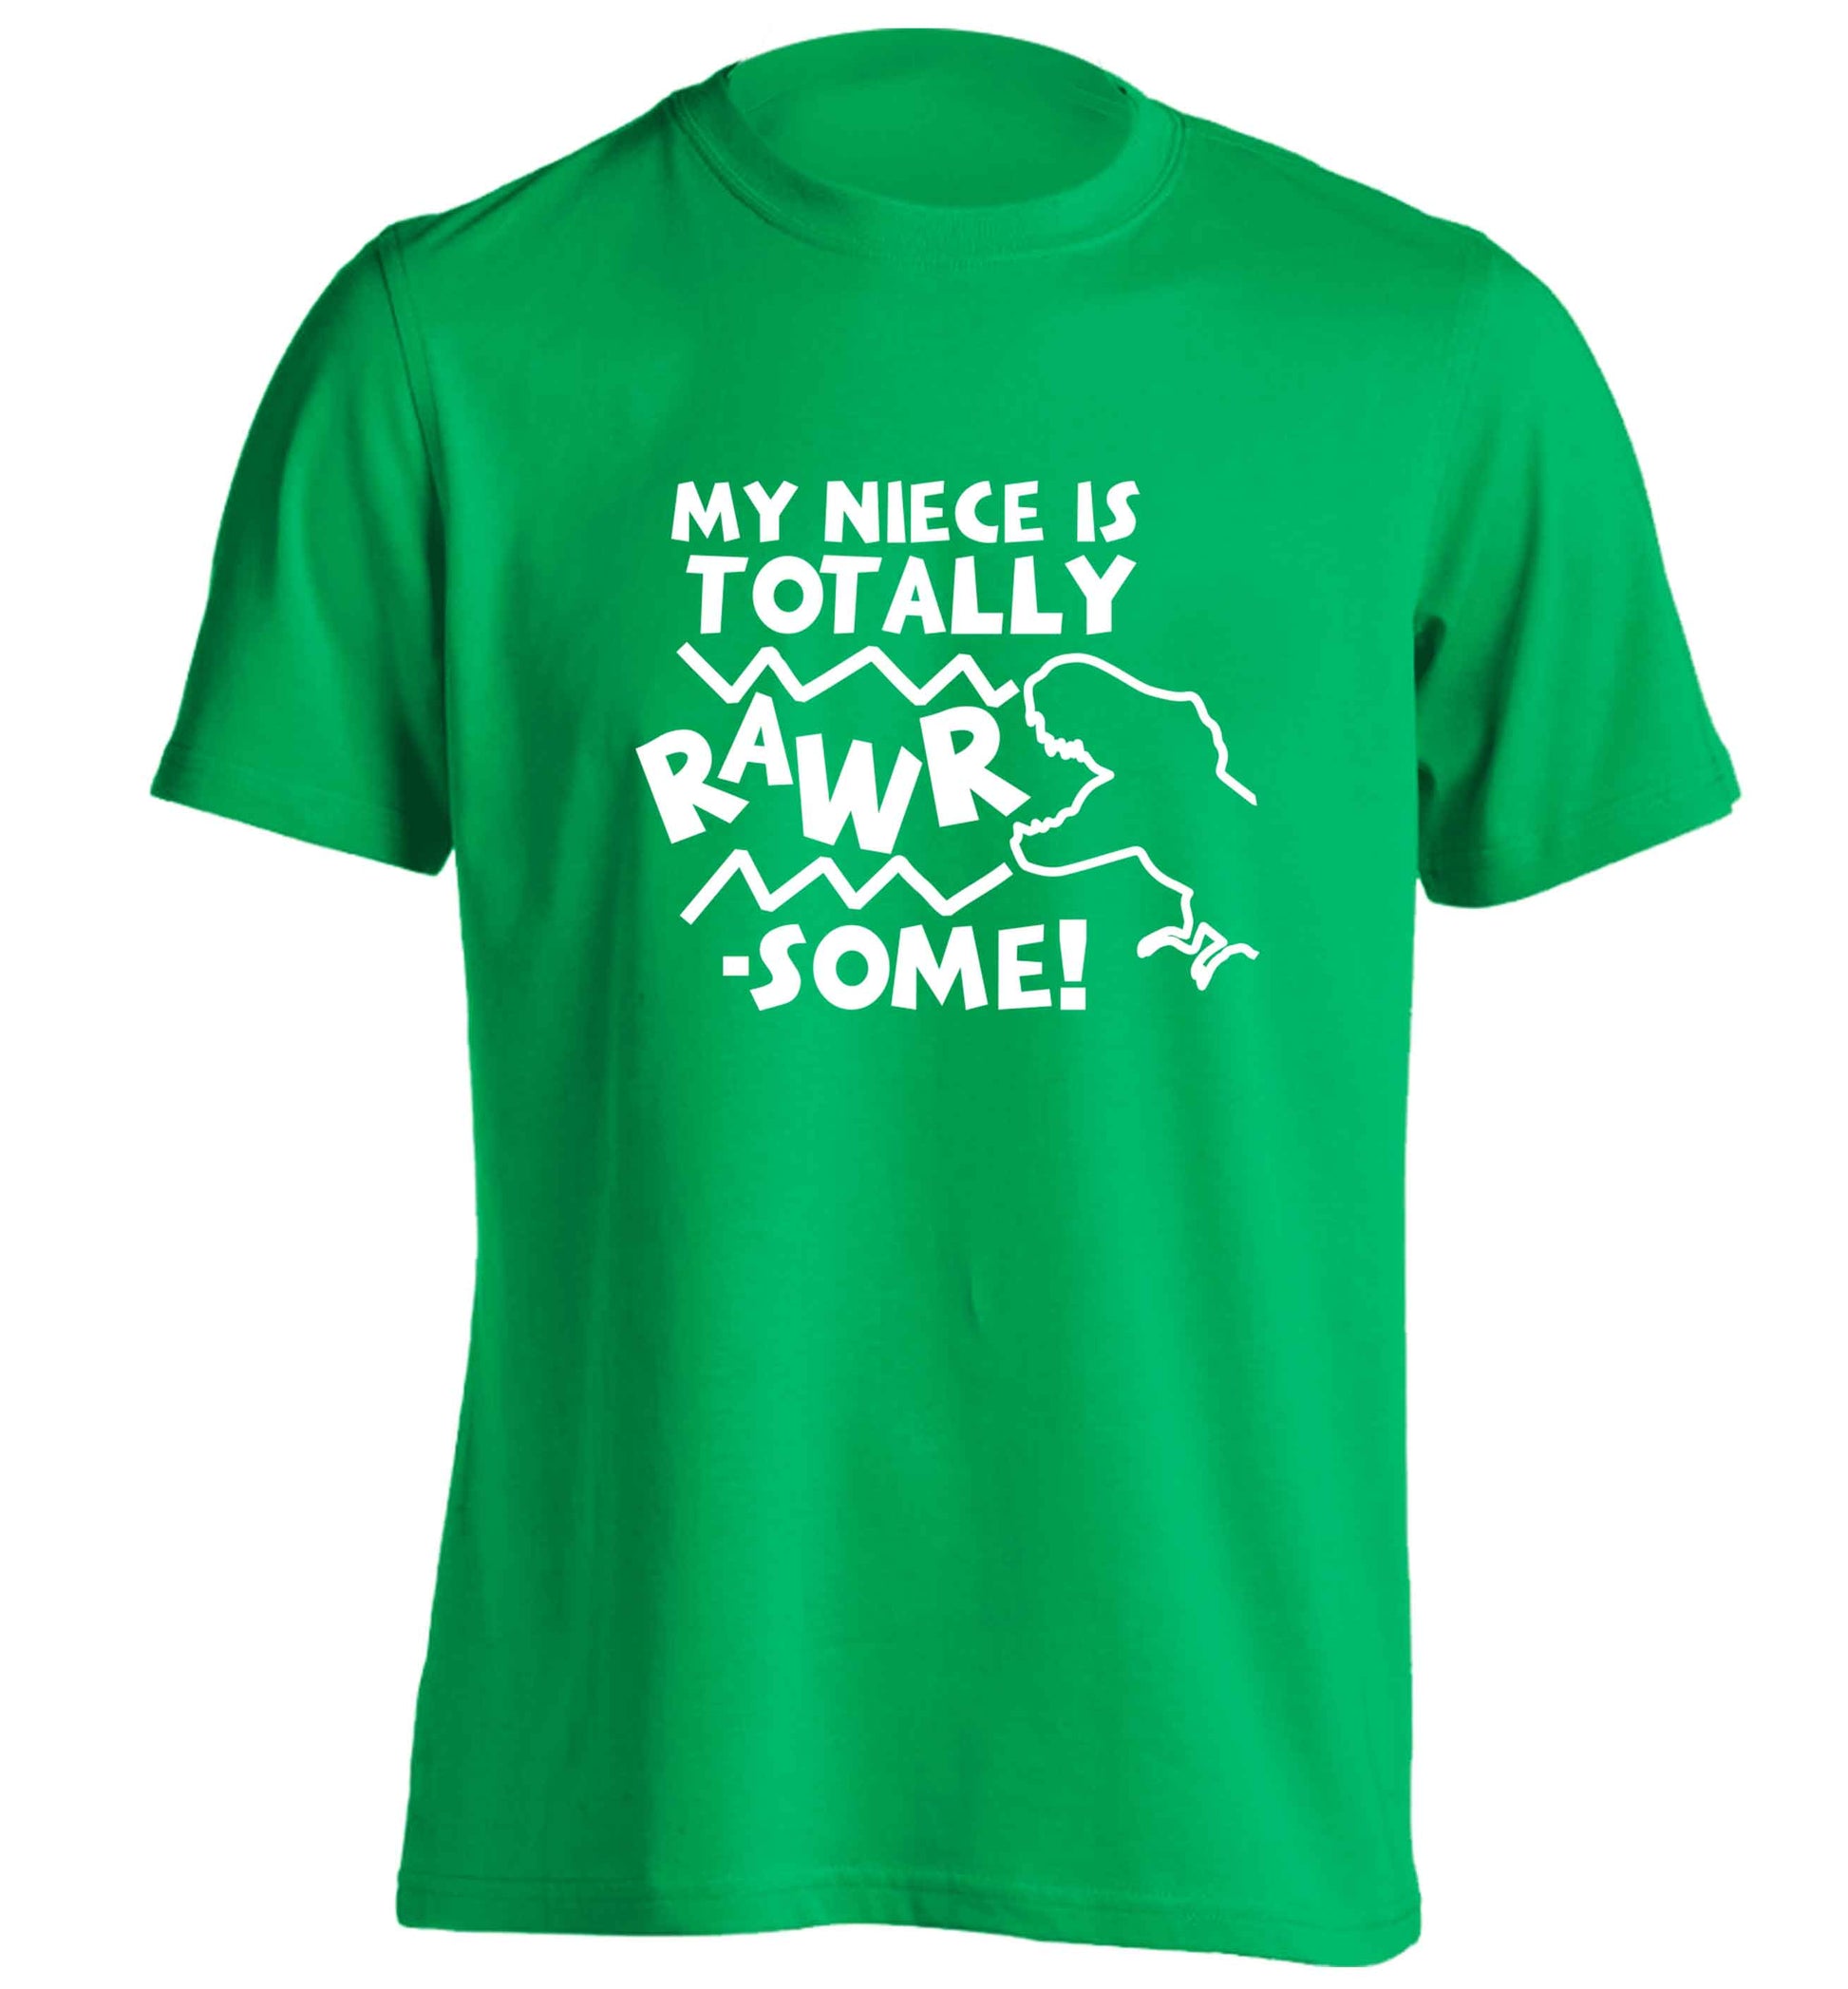 My niece is totally rawrsome adults unisex green Tshirt small